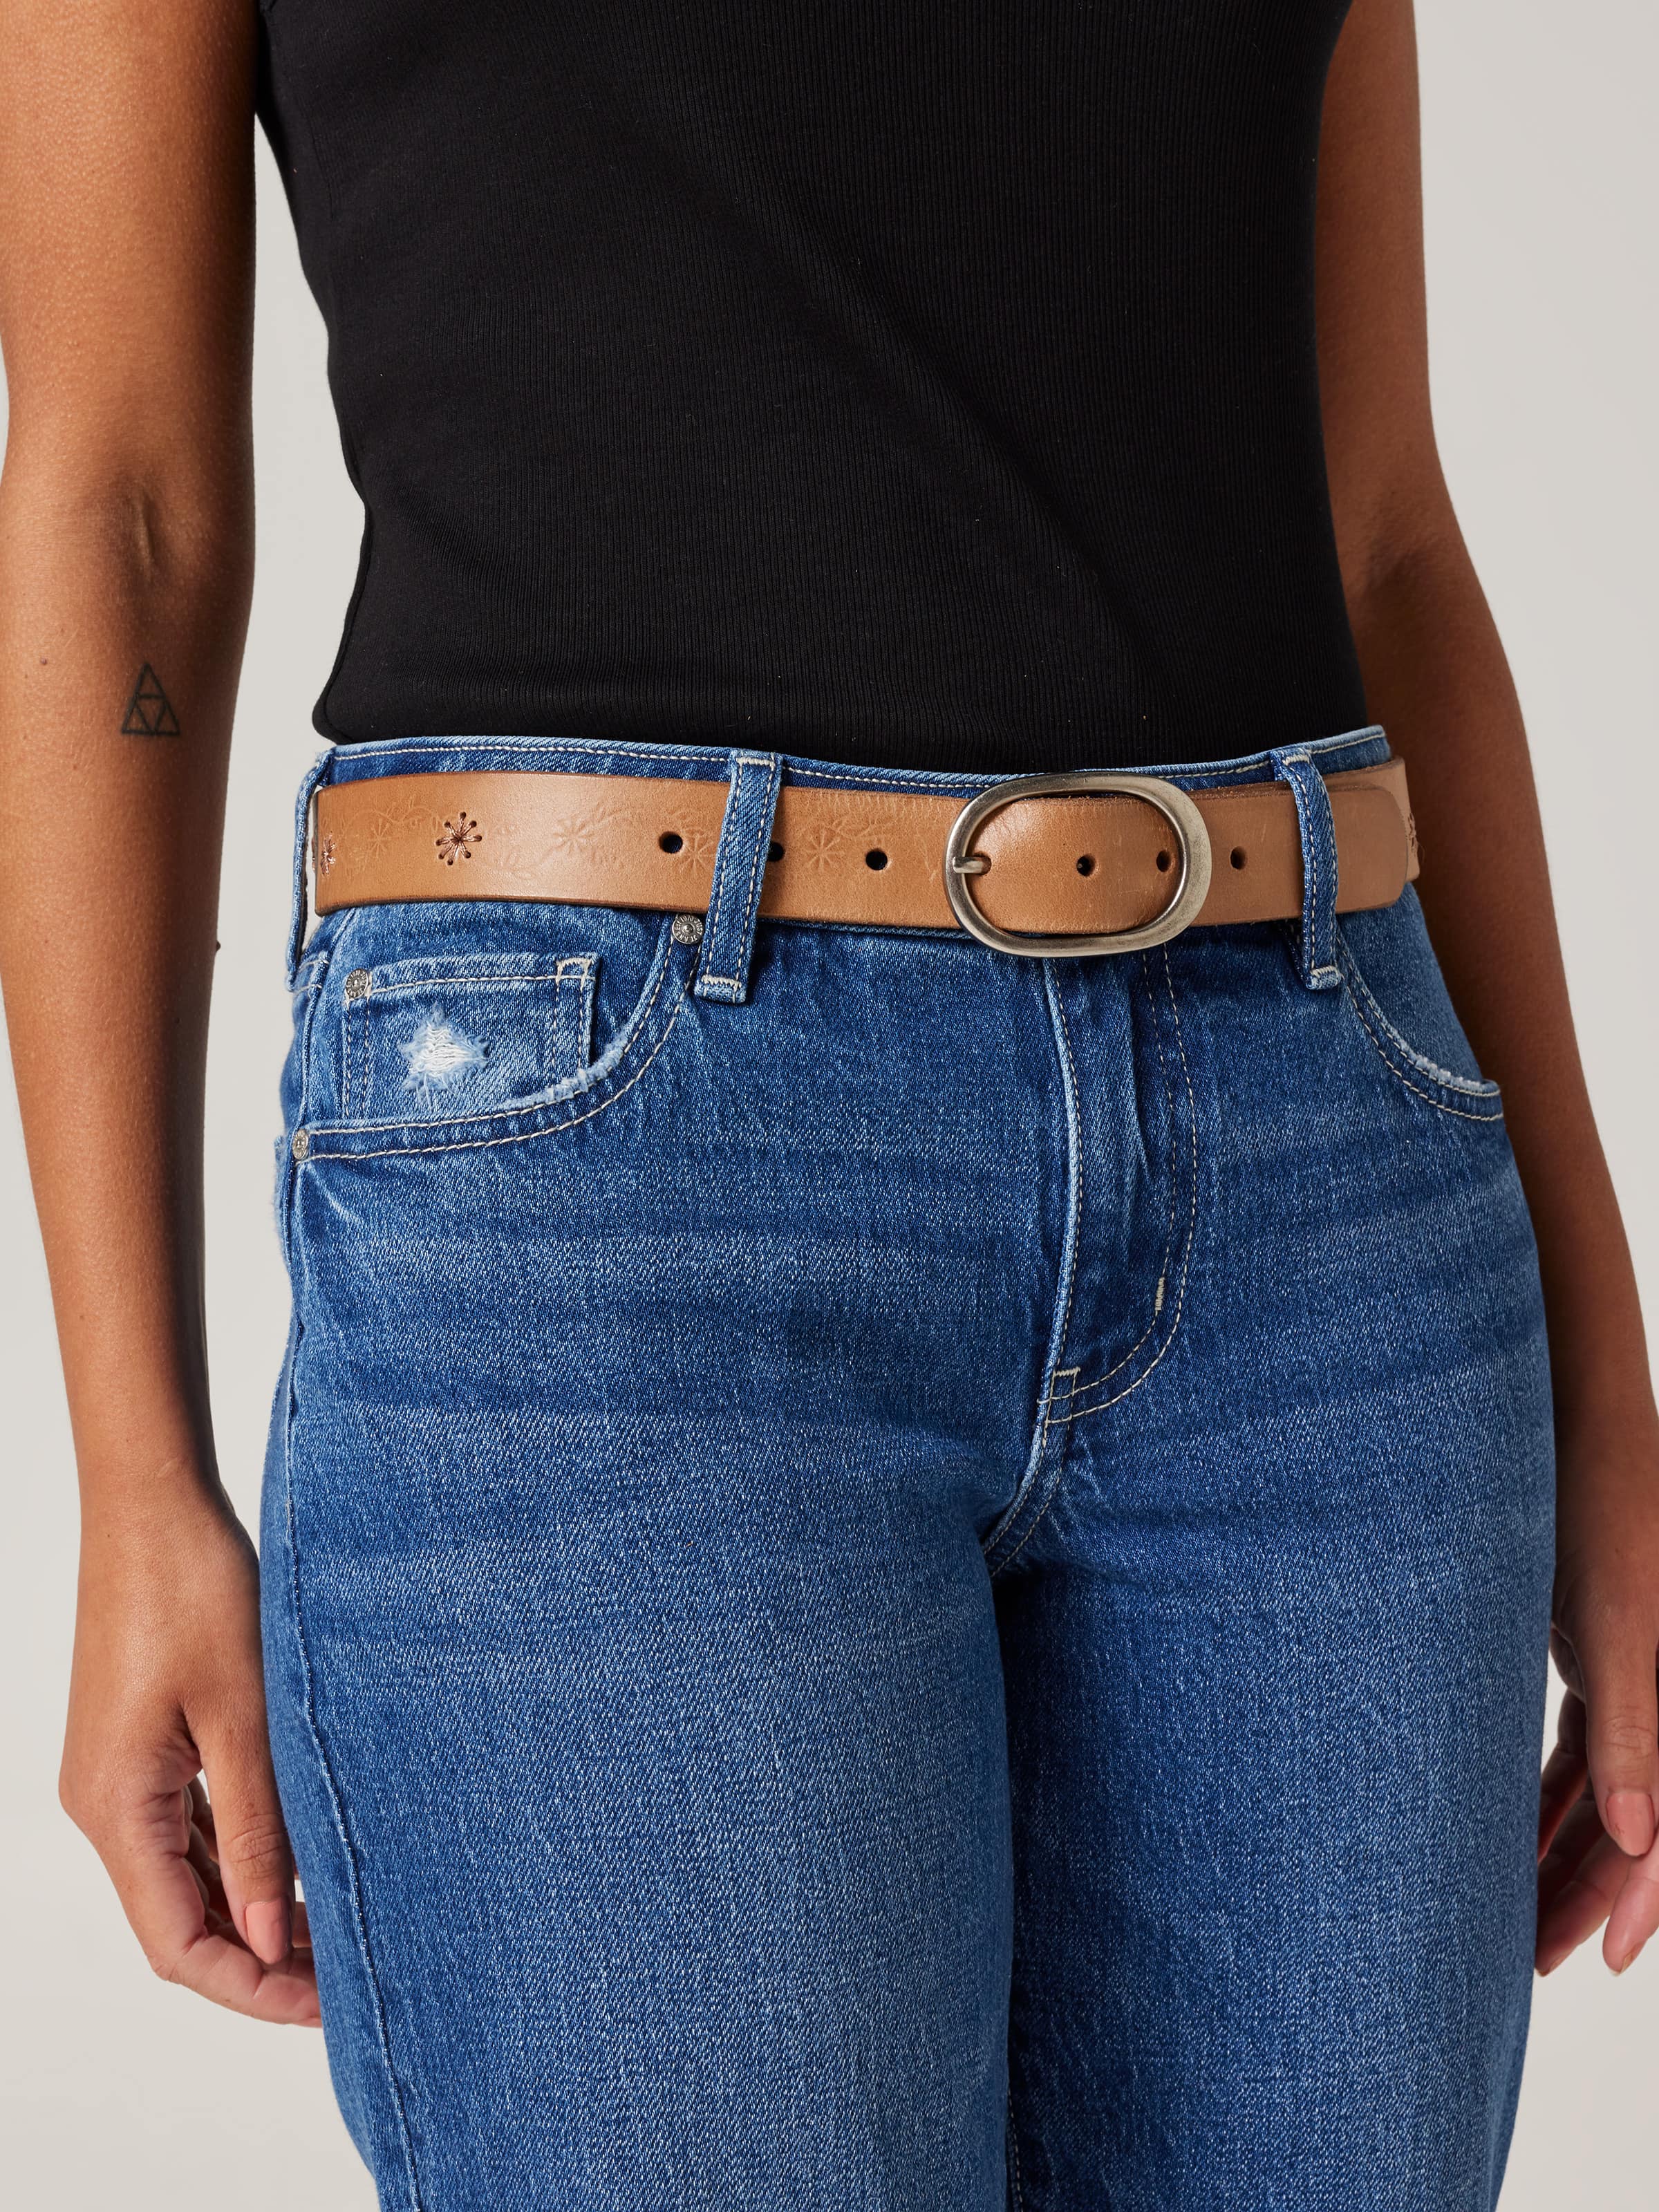 Daisy Handstitched Leather Belt - Just Jeans Online